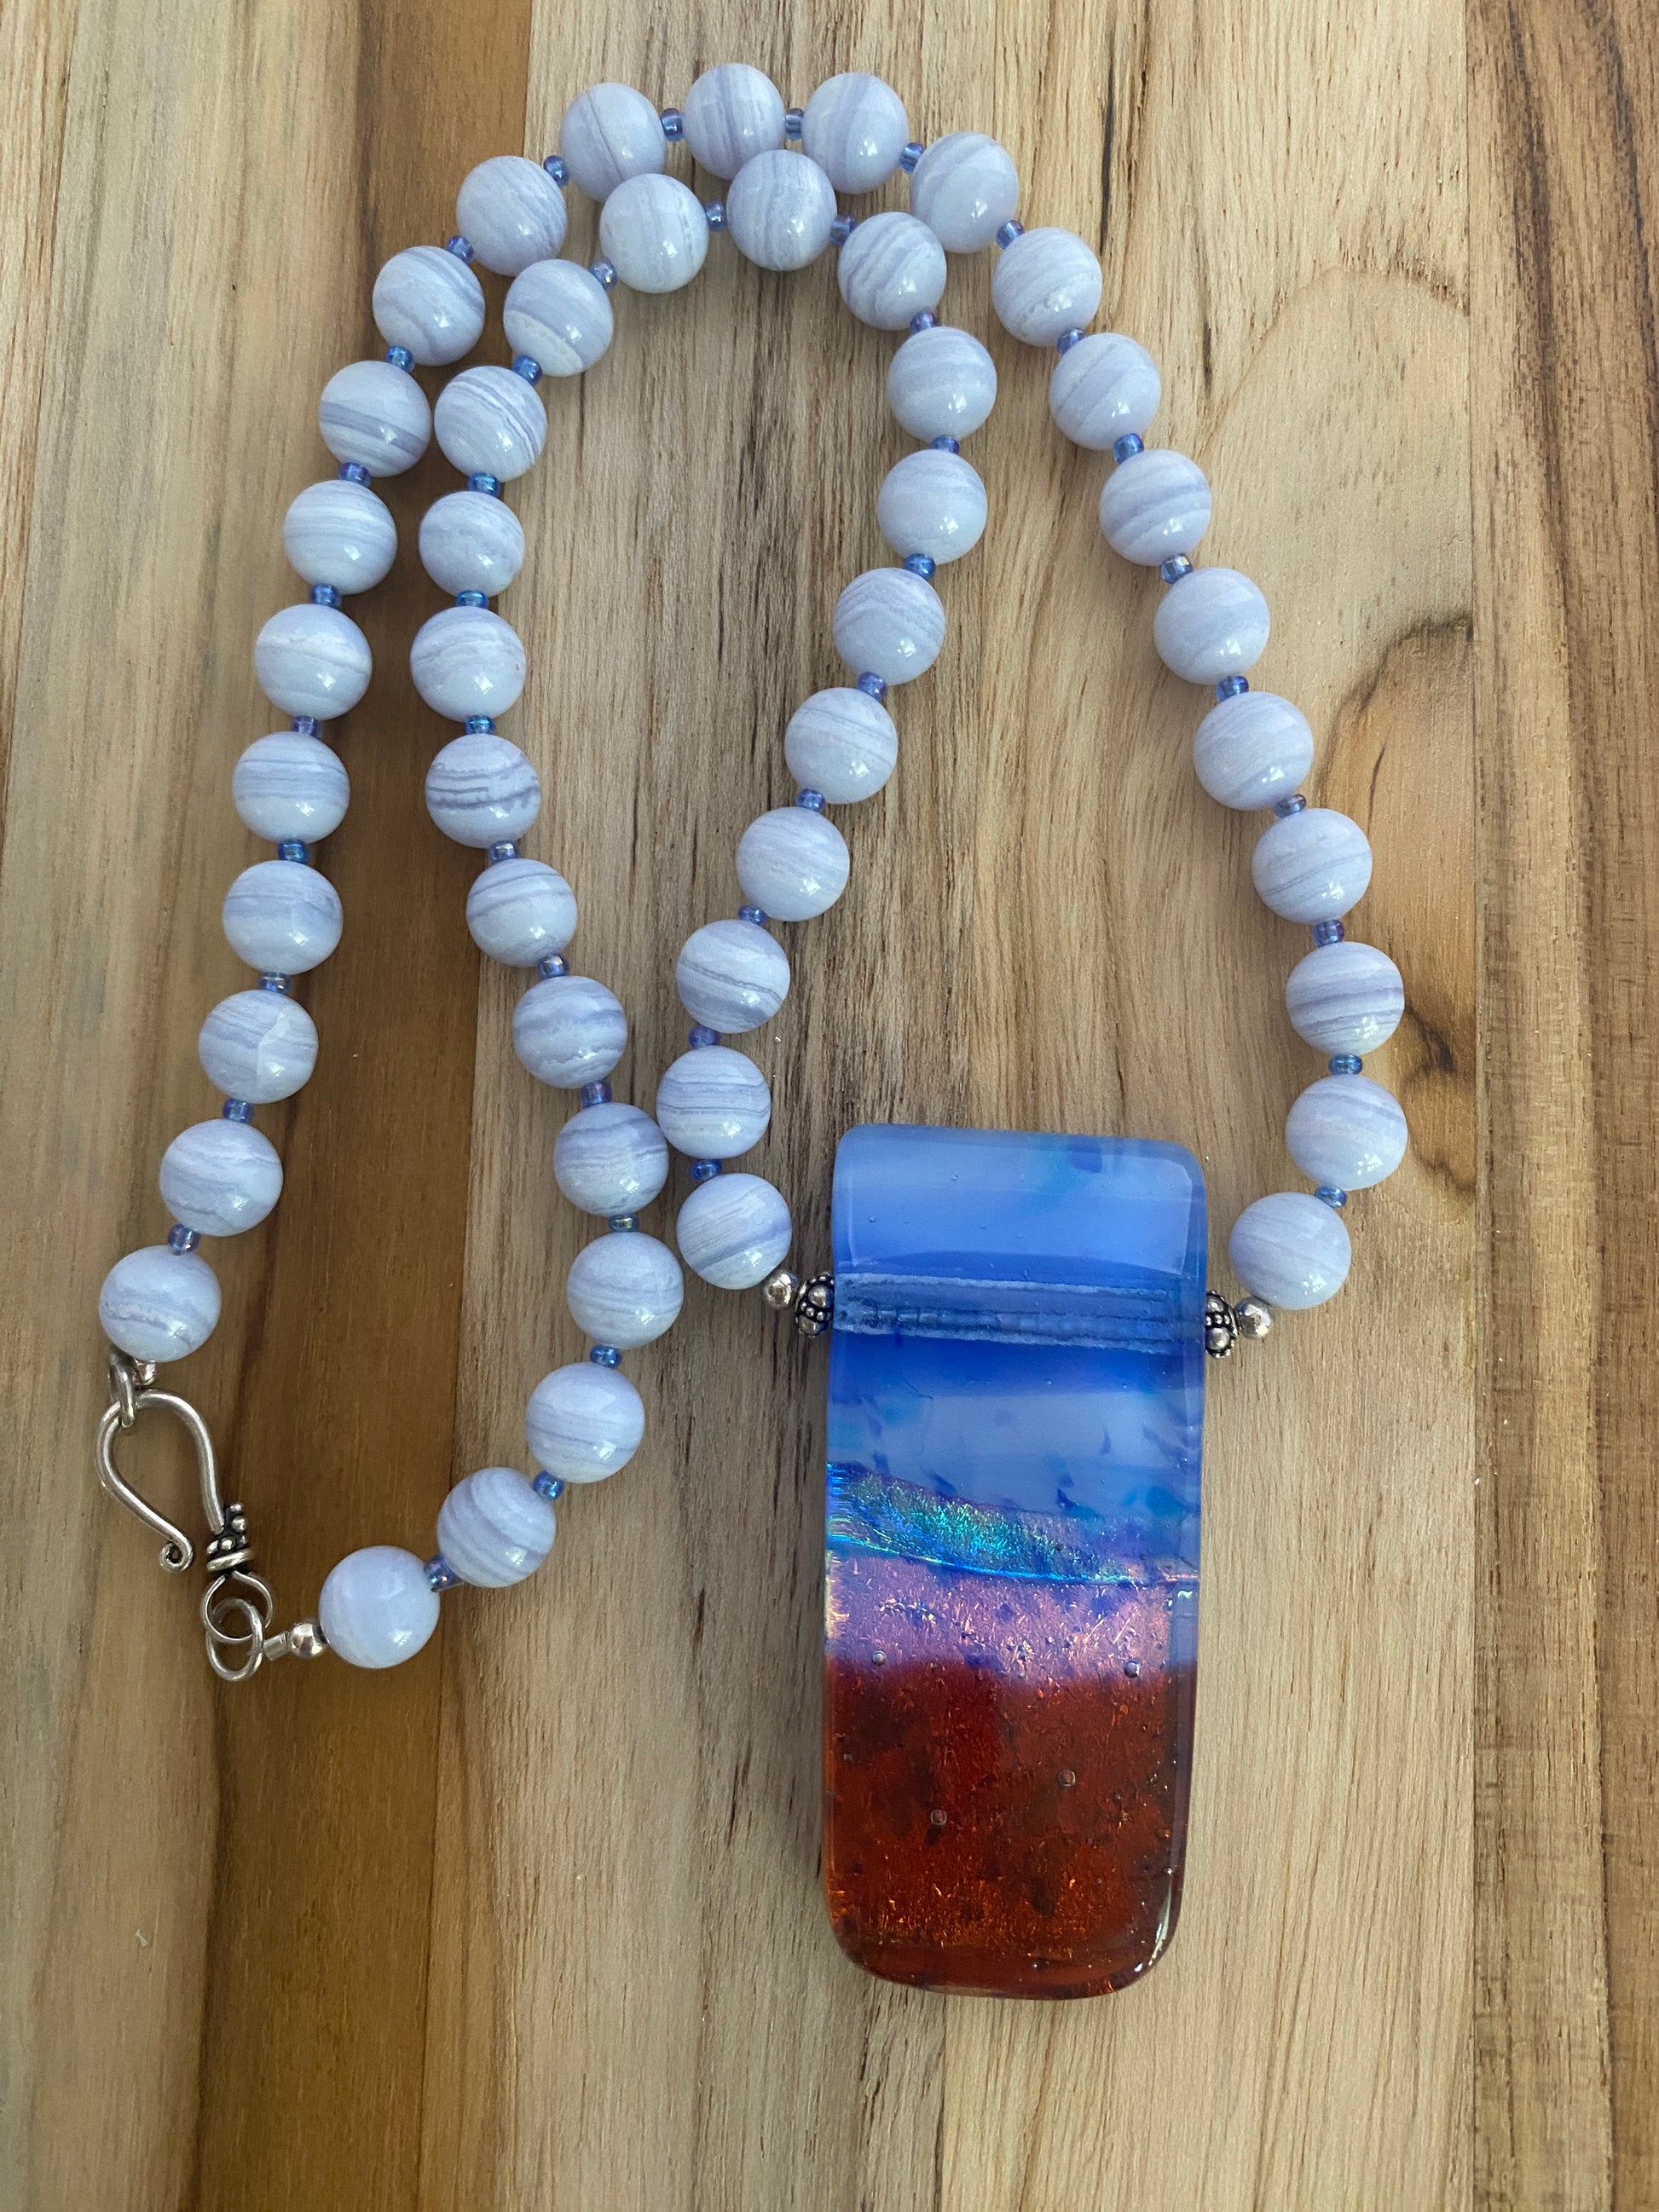 20" Dichroic Glass Pendant & Blue Lace Agate Necklace - My Urban Gems